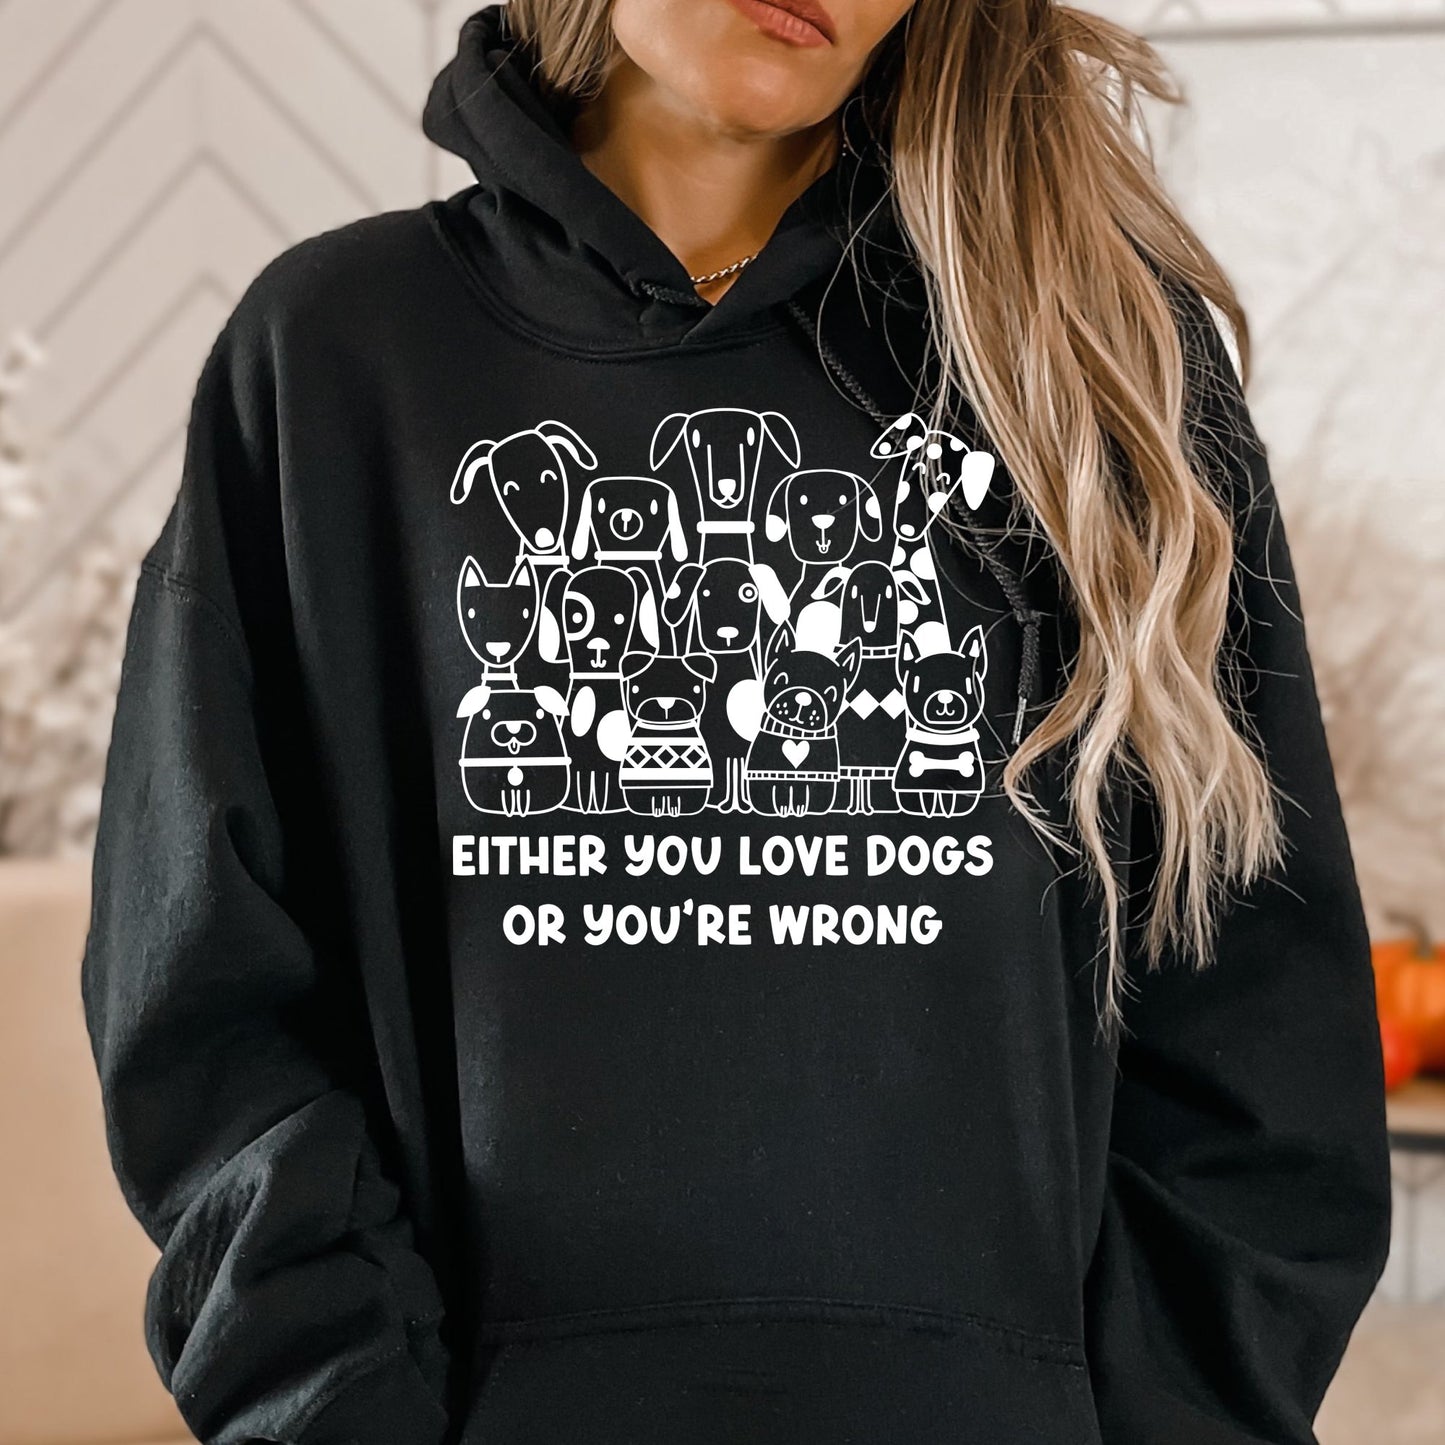 Either You Love Dogs or You're Wrong Hooded Sweatshirt - PuppyJo Sweatshirt S / Black